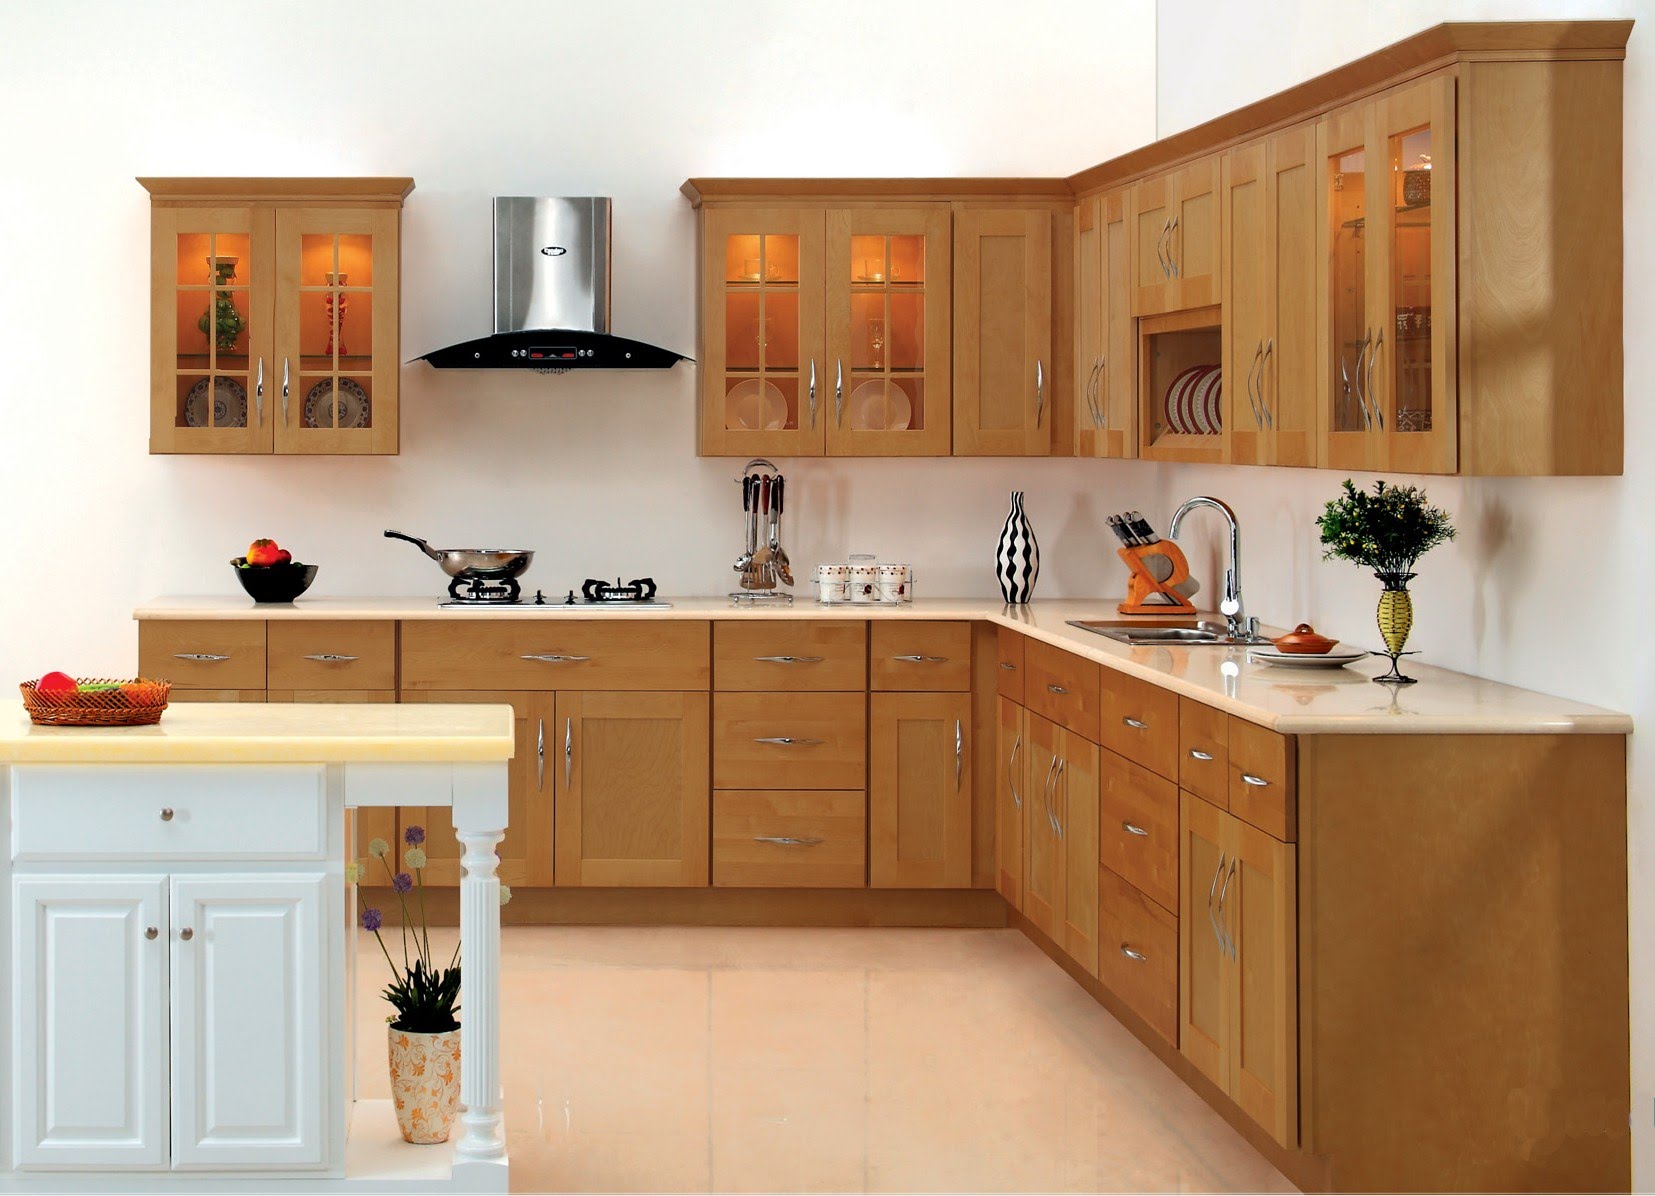 Why you need kitchen inspiration to come
  up with the right kitchen cabinets design